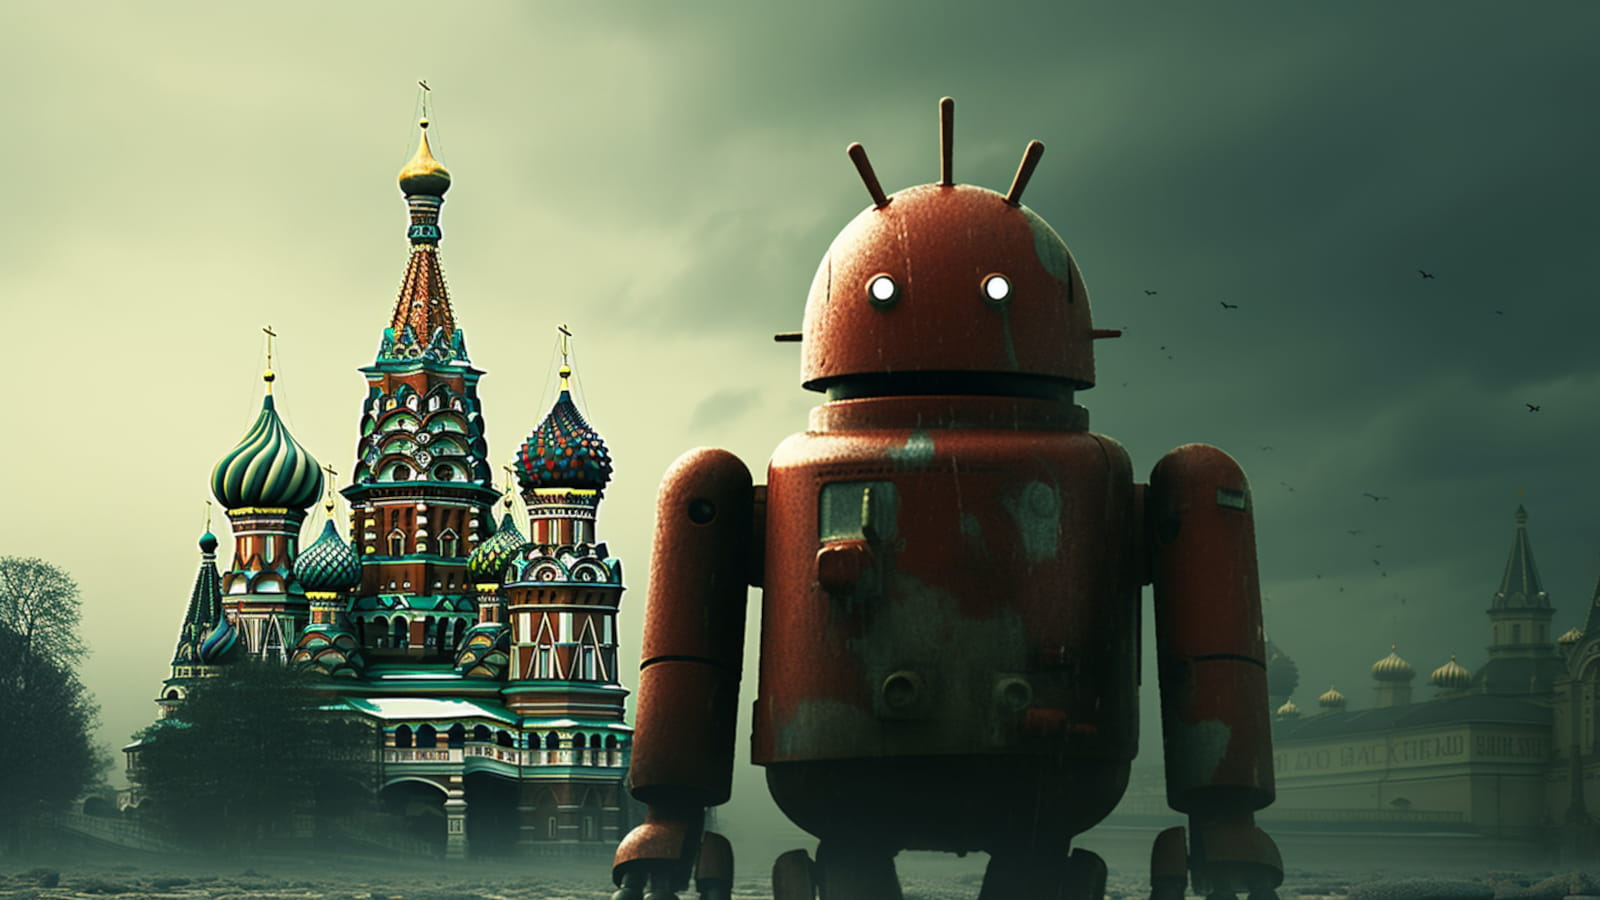 GRU hackers attack Ukrainian military with new Android malware